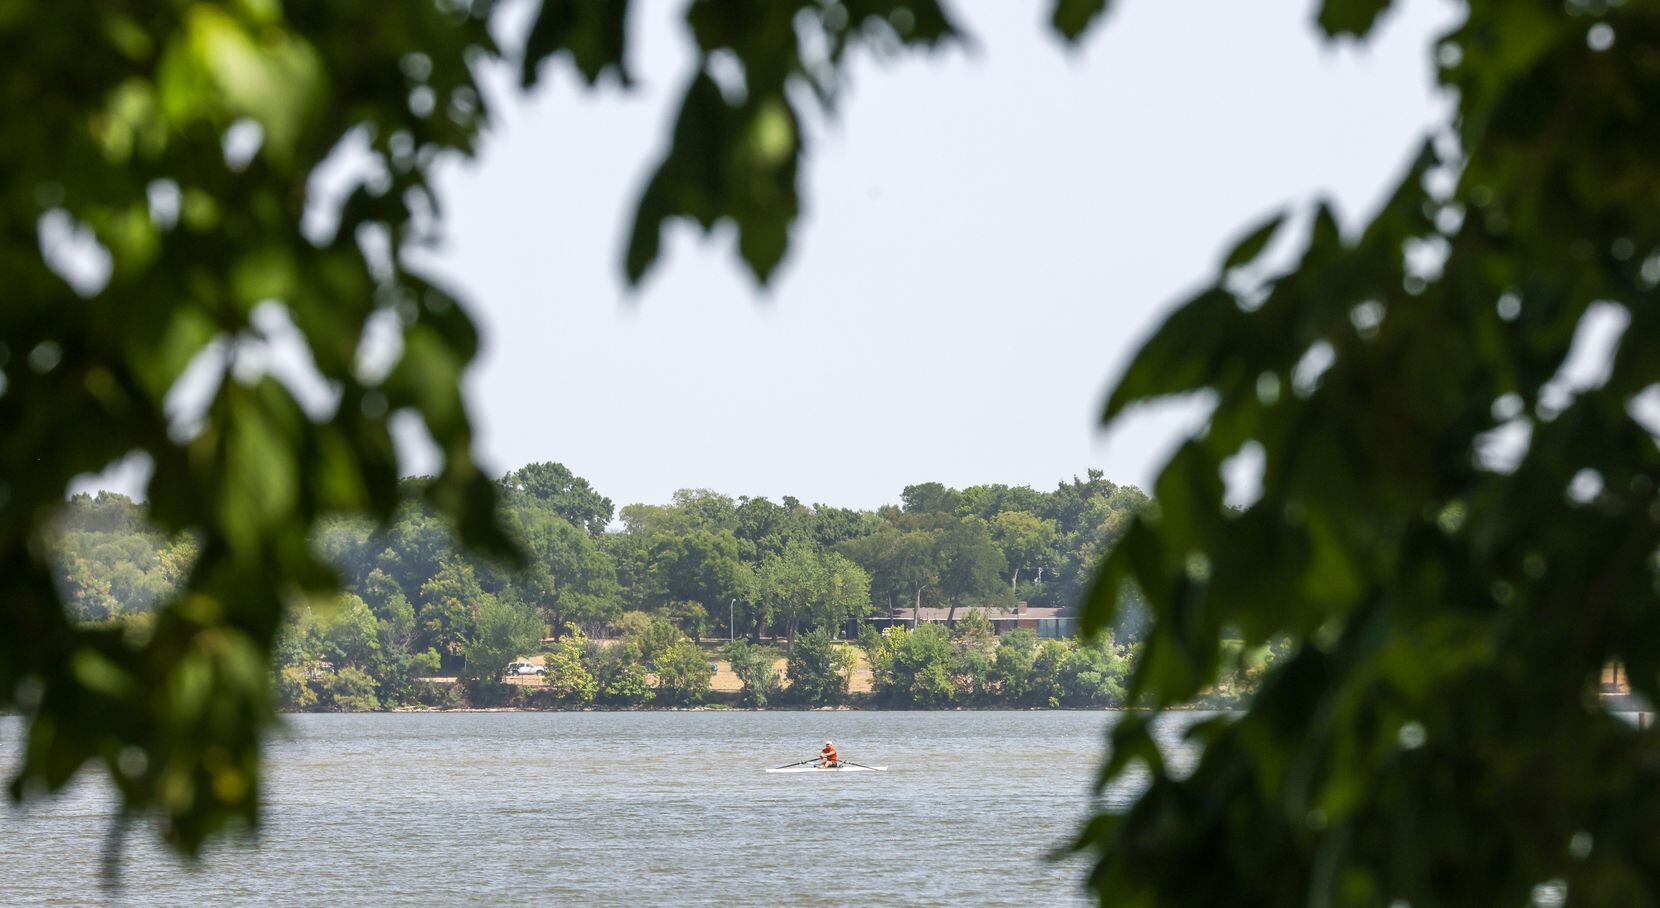 Bill Keros rowed on White Rock Lake in Dallas on Monday as area temperatures hit 109 degrees.